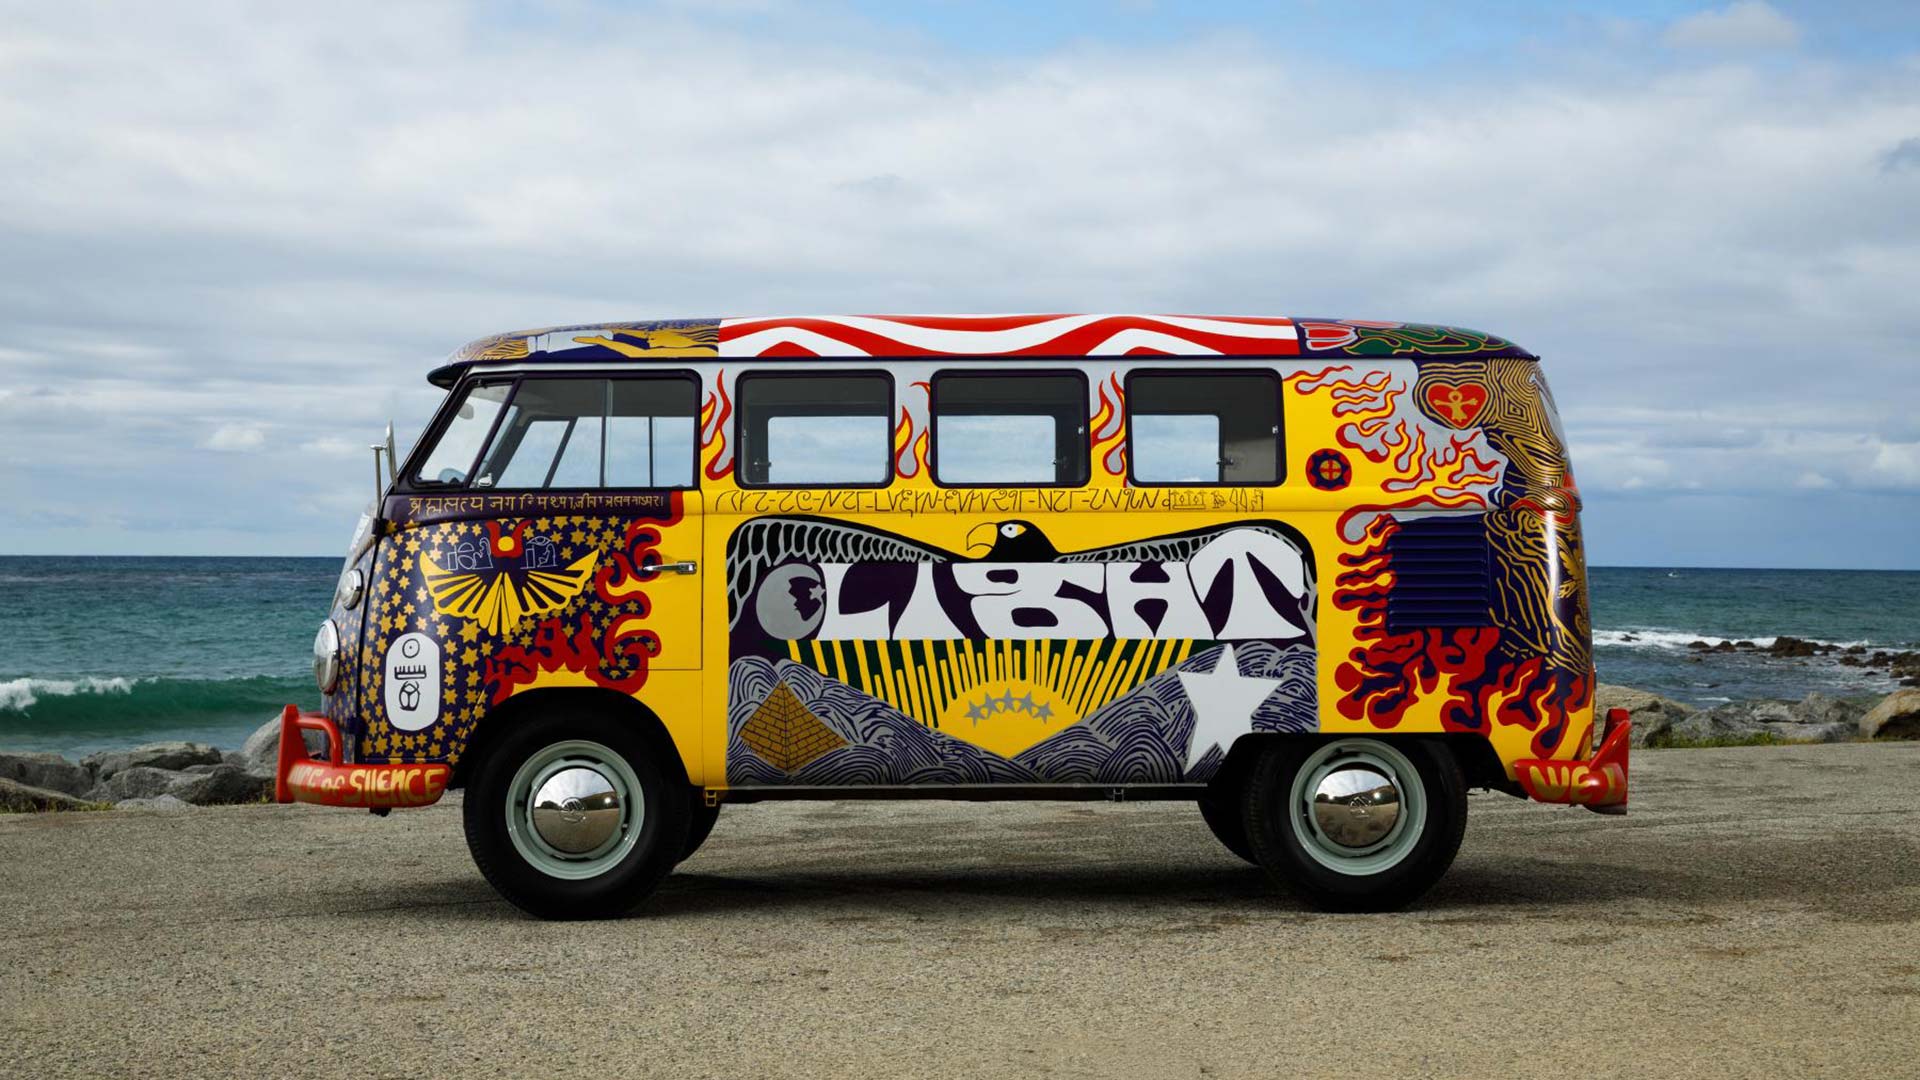 Legendary 1969 Woodstock Summer of Love VW bus brought back to life